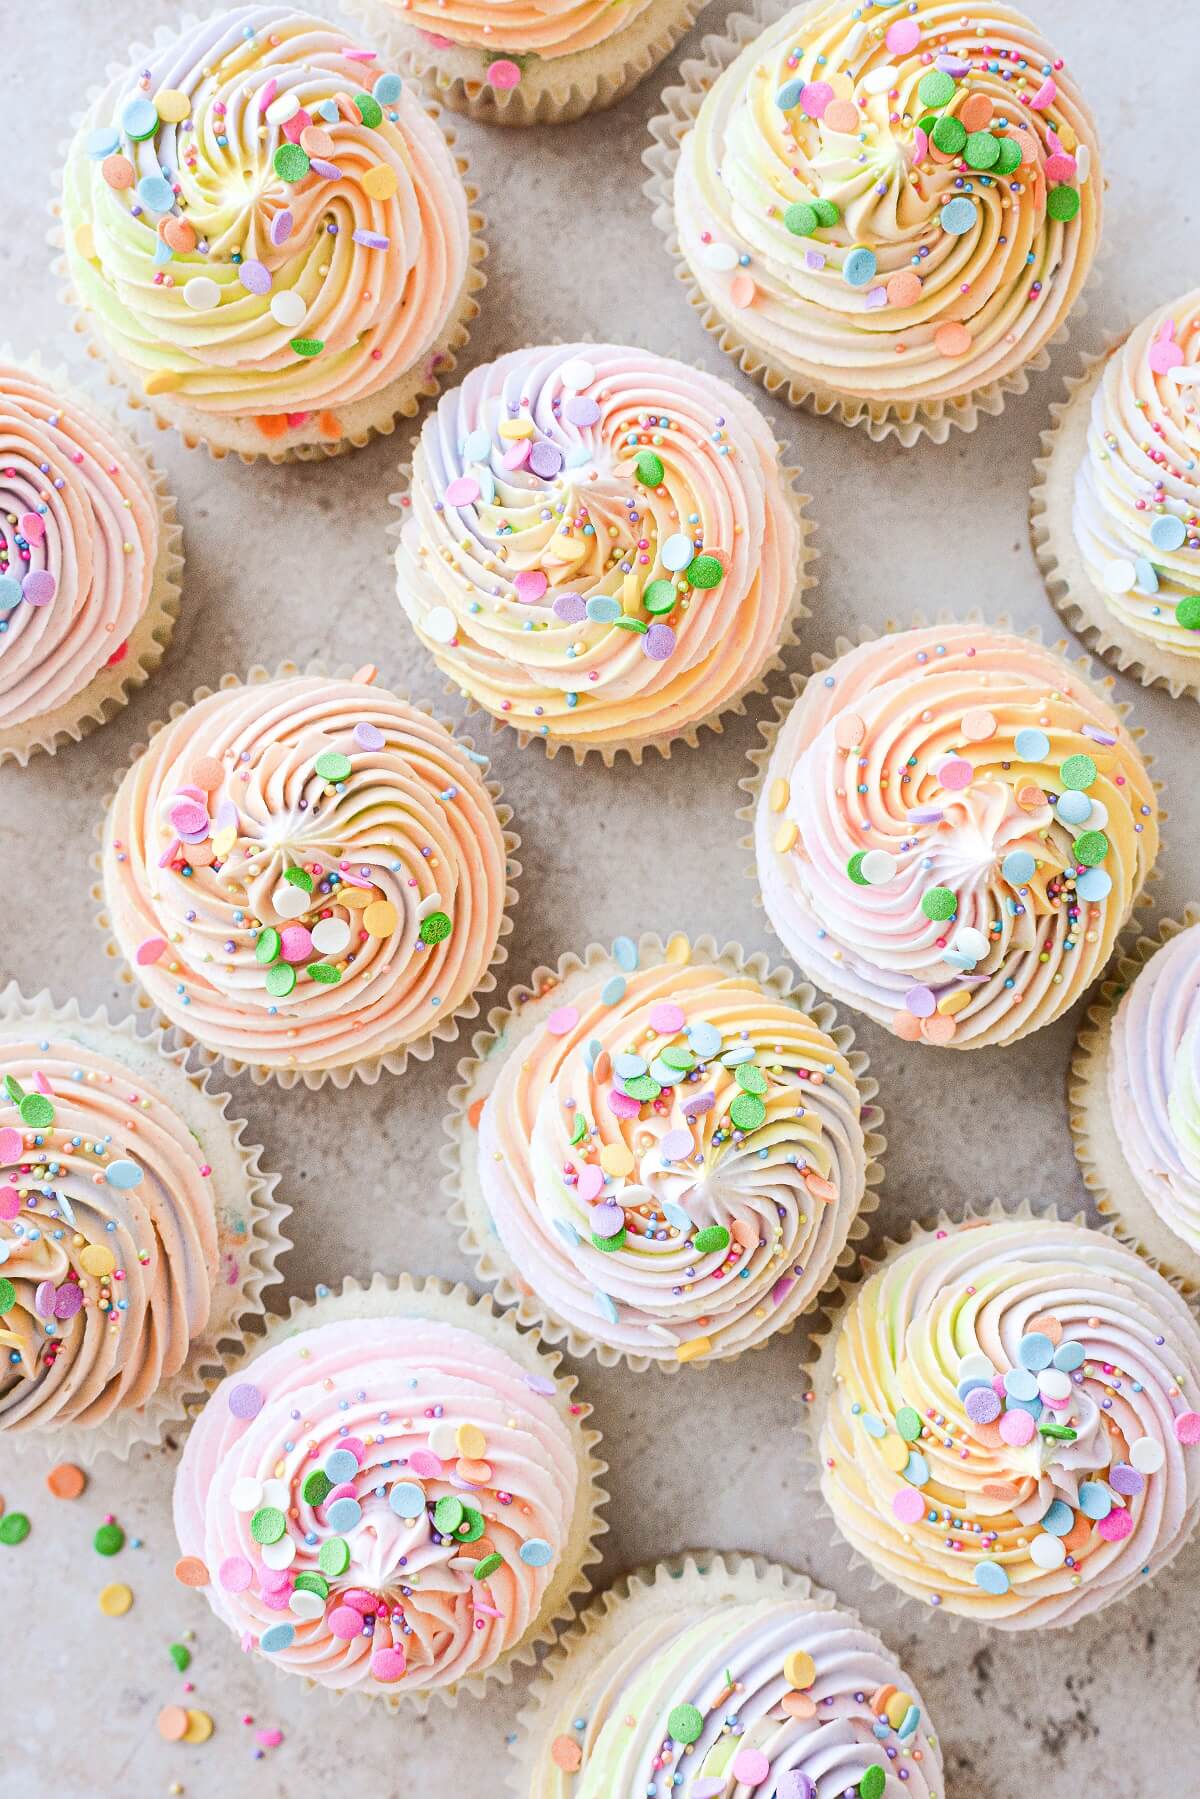 Funfetti cupcakes topped with rainbow sprinkles.